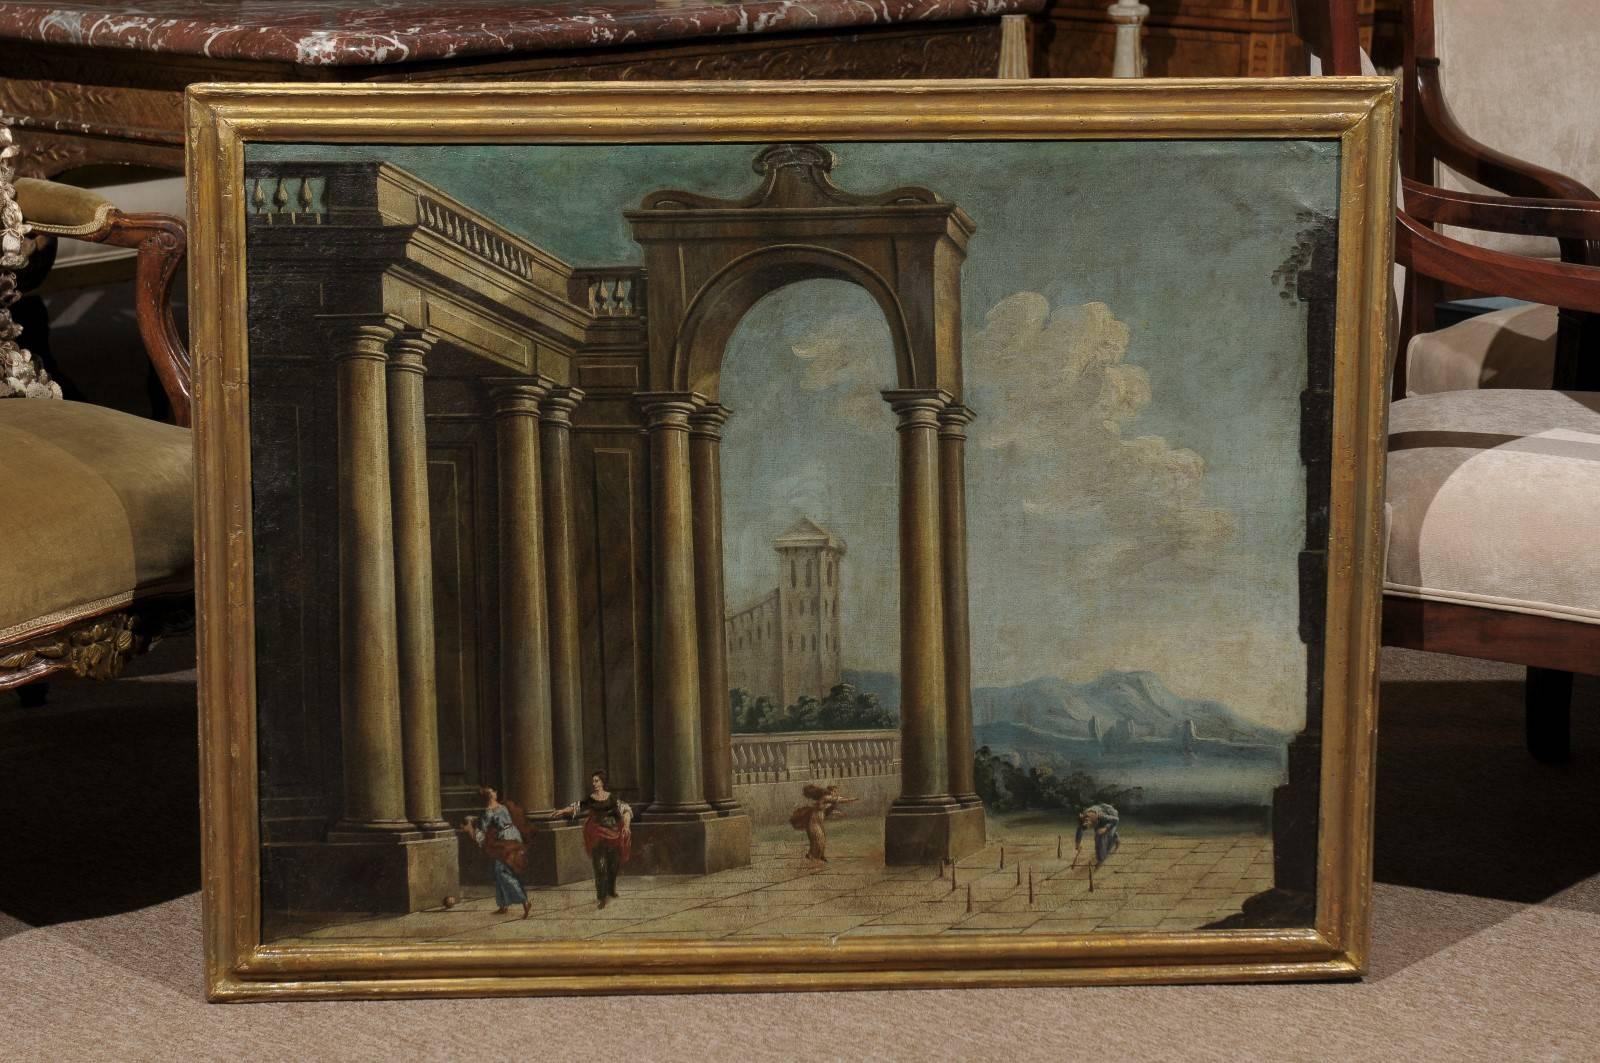 Late 18th-early 19th century Italian oil on canvas classical style paintings of Roman scenes (Capriccio). Frames are original to the paintings, but painted later. They are in excellent condition for their age with no tears or damage to the canvas.